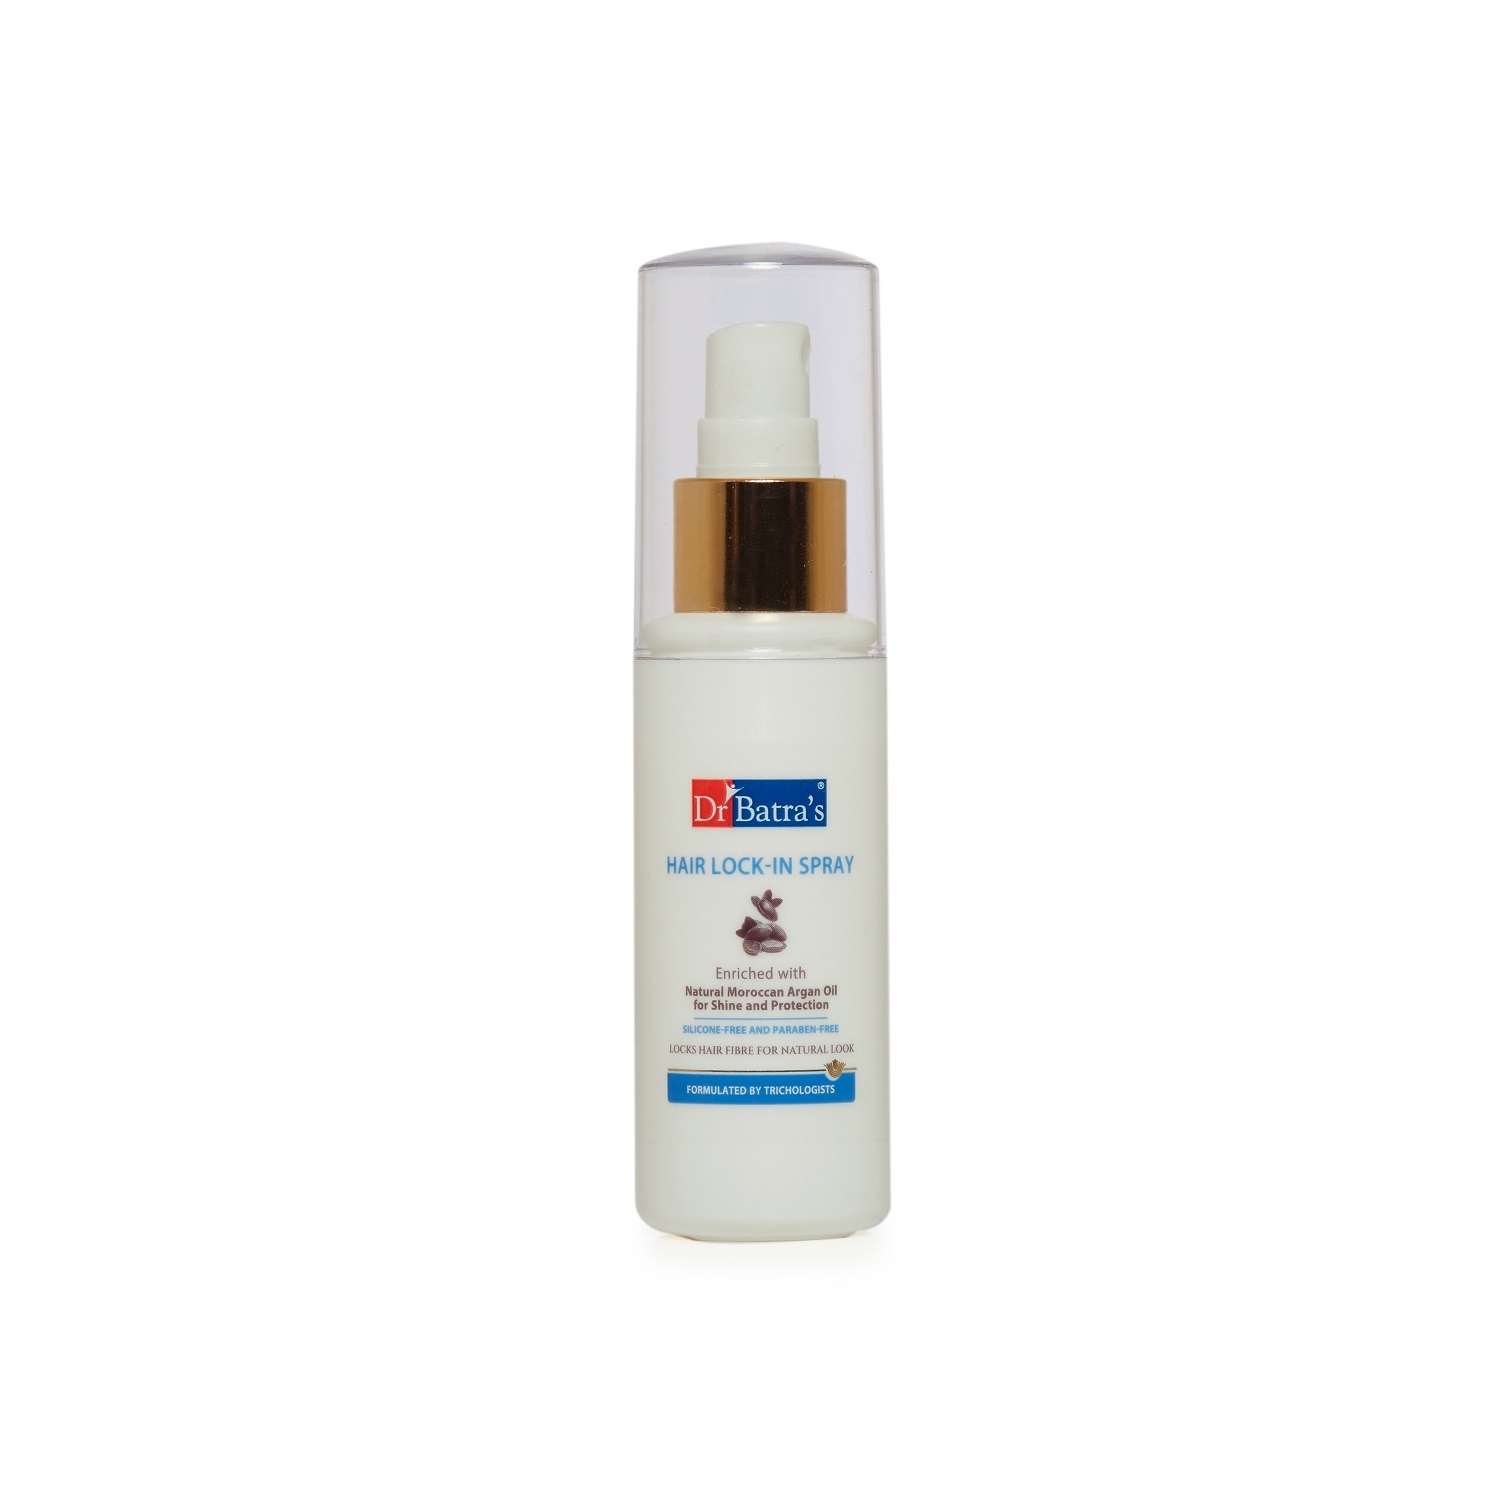 Dr Batra's | Dr Batra's PRO+ Lock-In Spray - 50 ml | Enriched with Natural Argan oil  | Silicone-Free and Paraben-Free 0